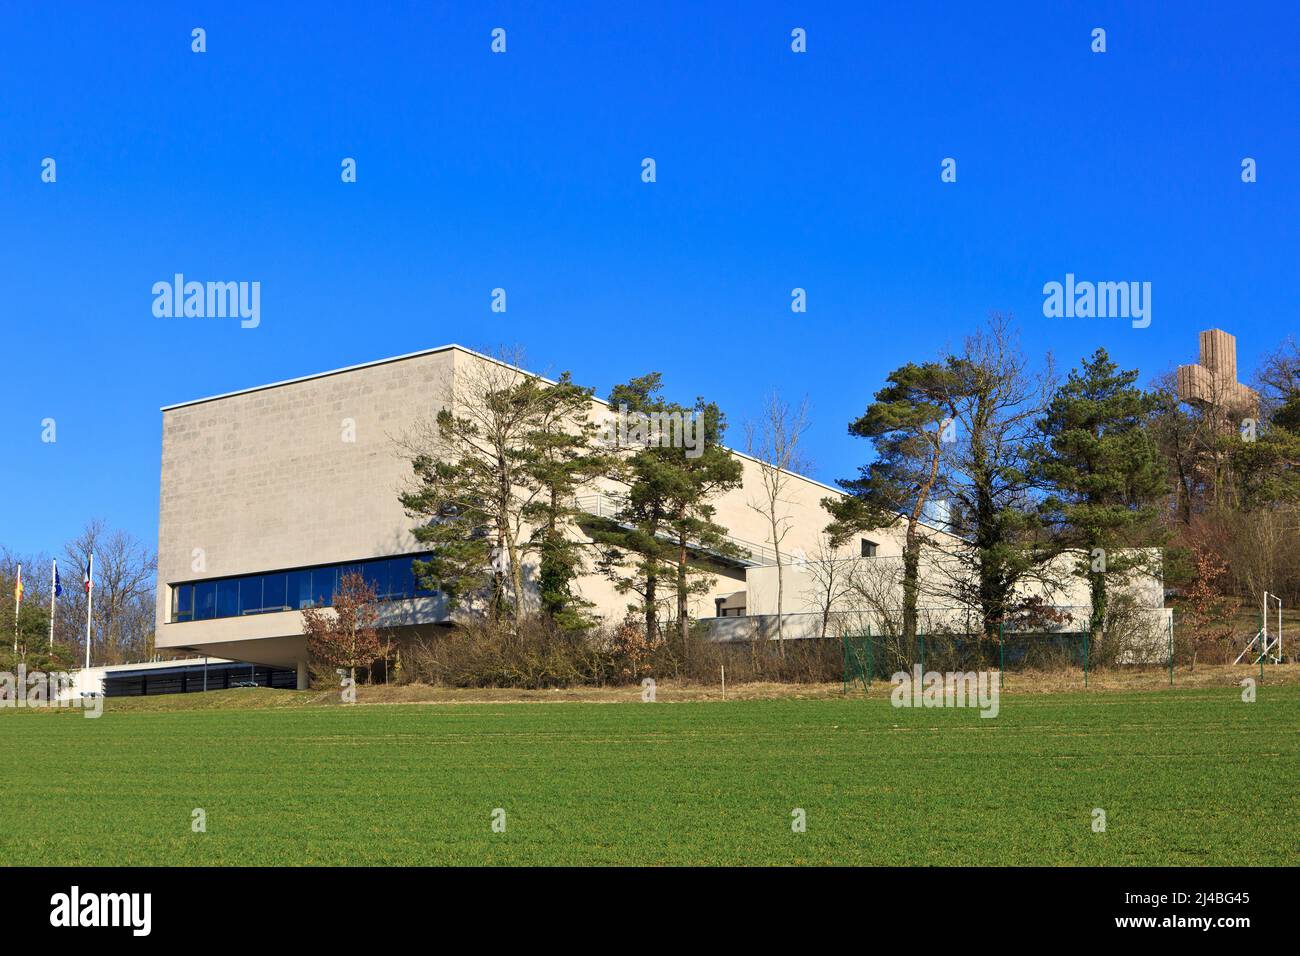 Facade of the Charles de Gaulle Memorial (museum and Cross of Lorraine) in Colombey-les-Deux-Eglises, France Stock Photo